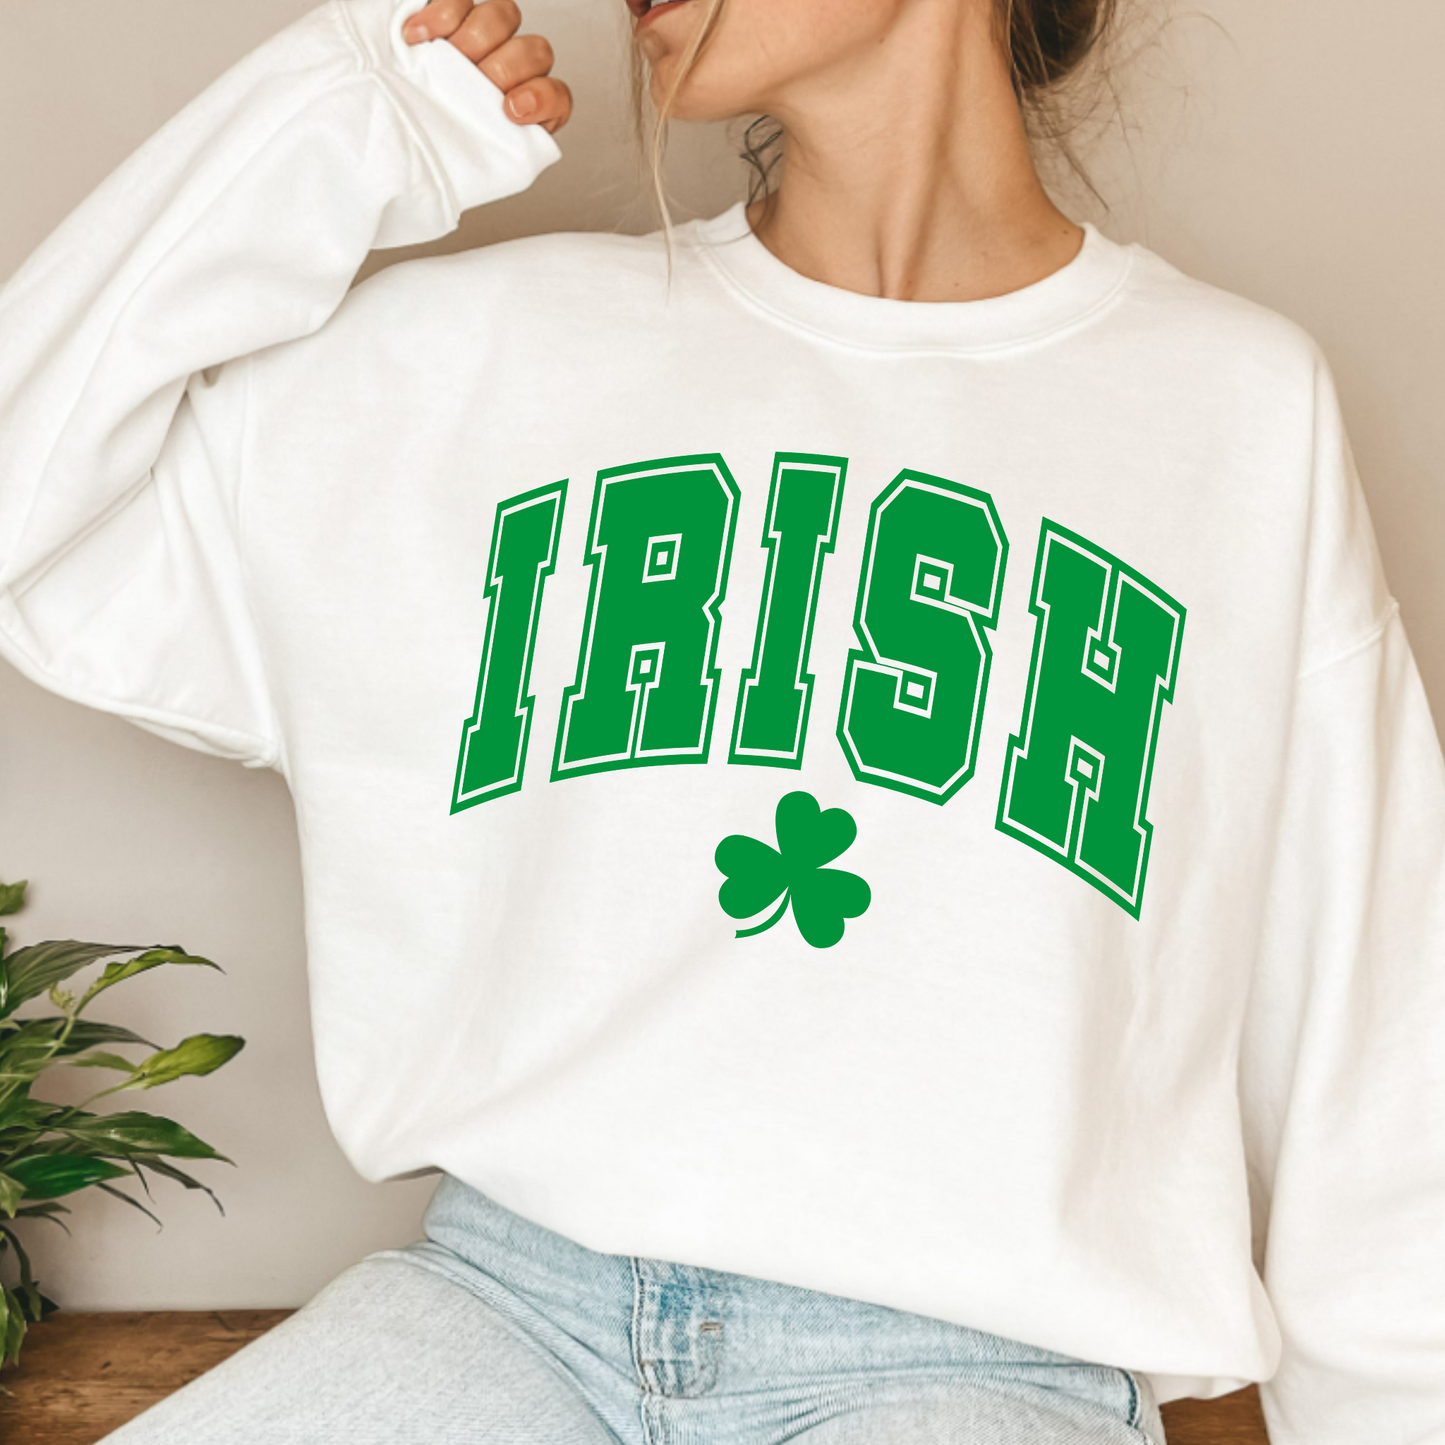 (Shirt not Included) IRISH- CLEAR FILM Transfer